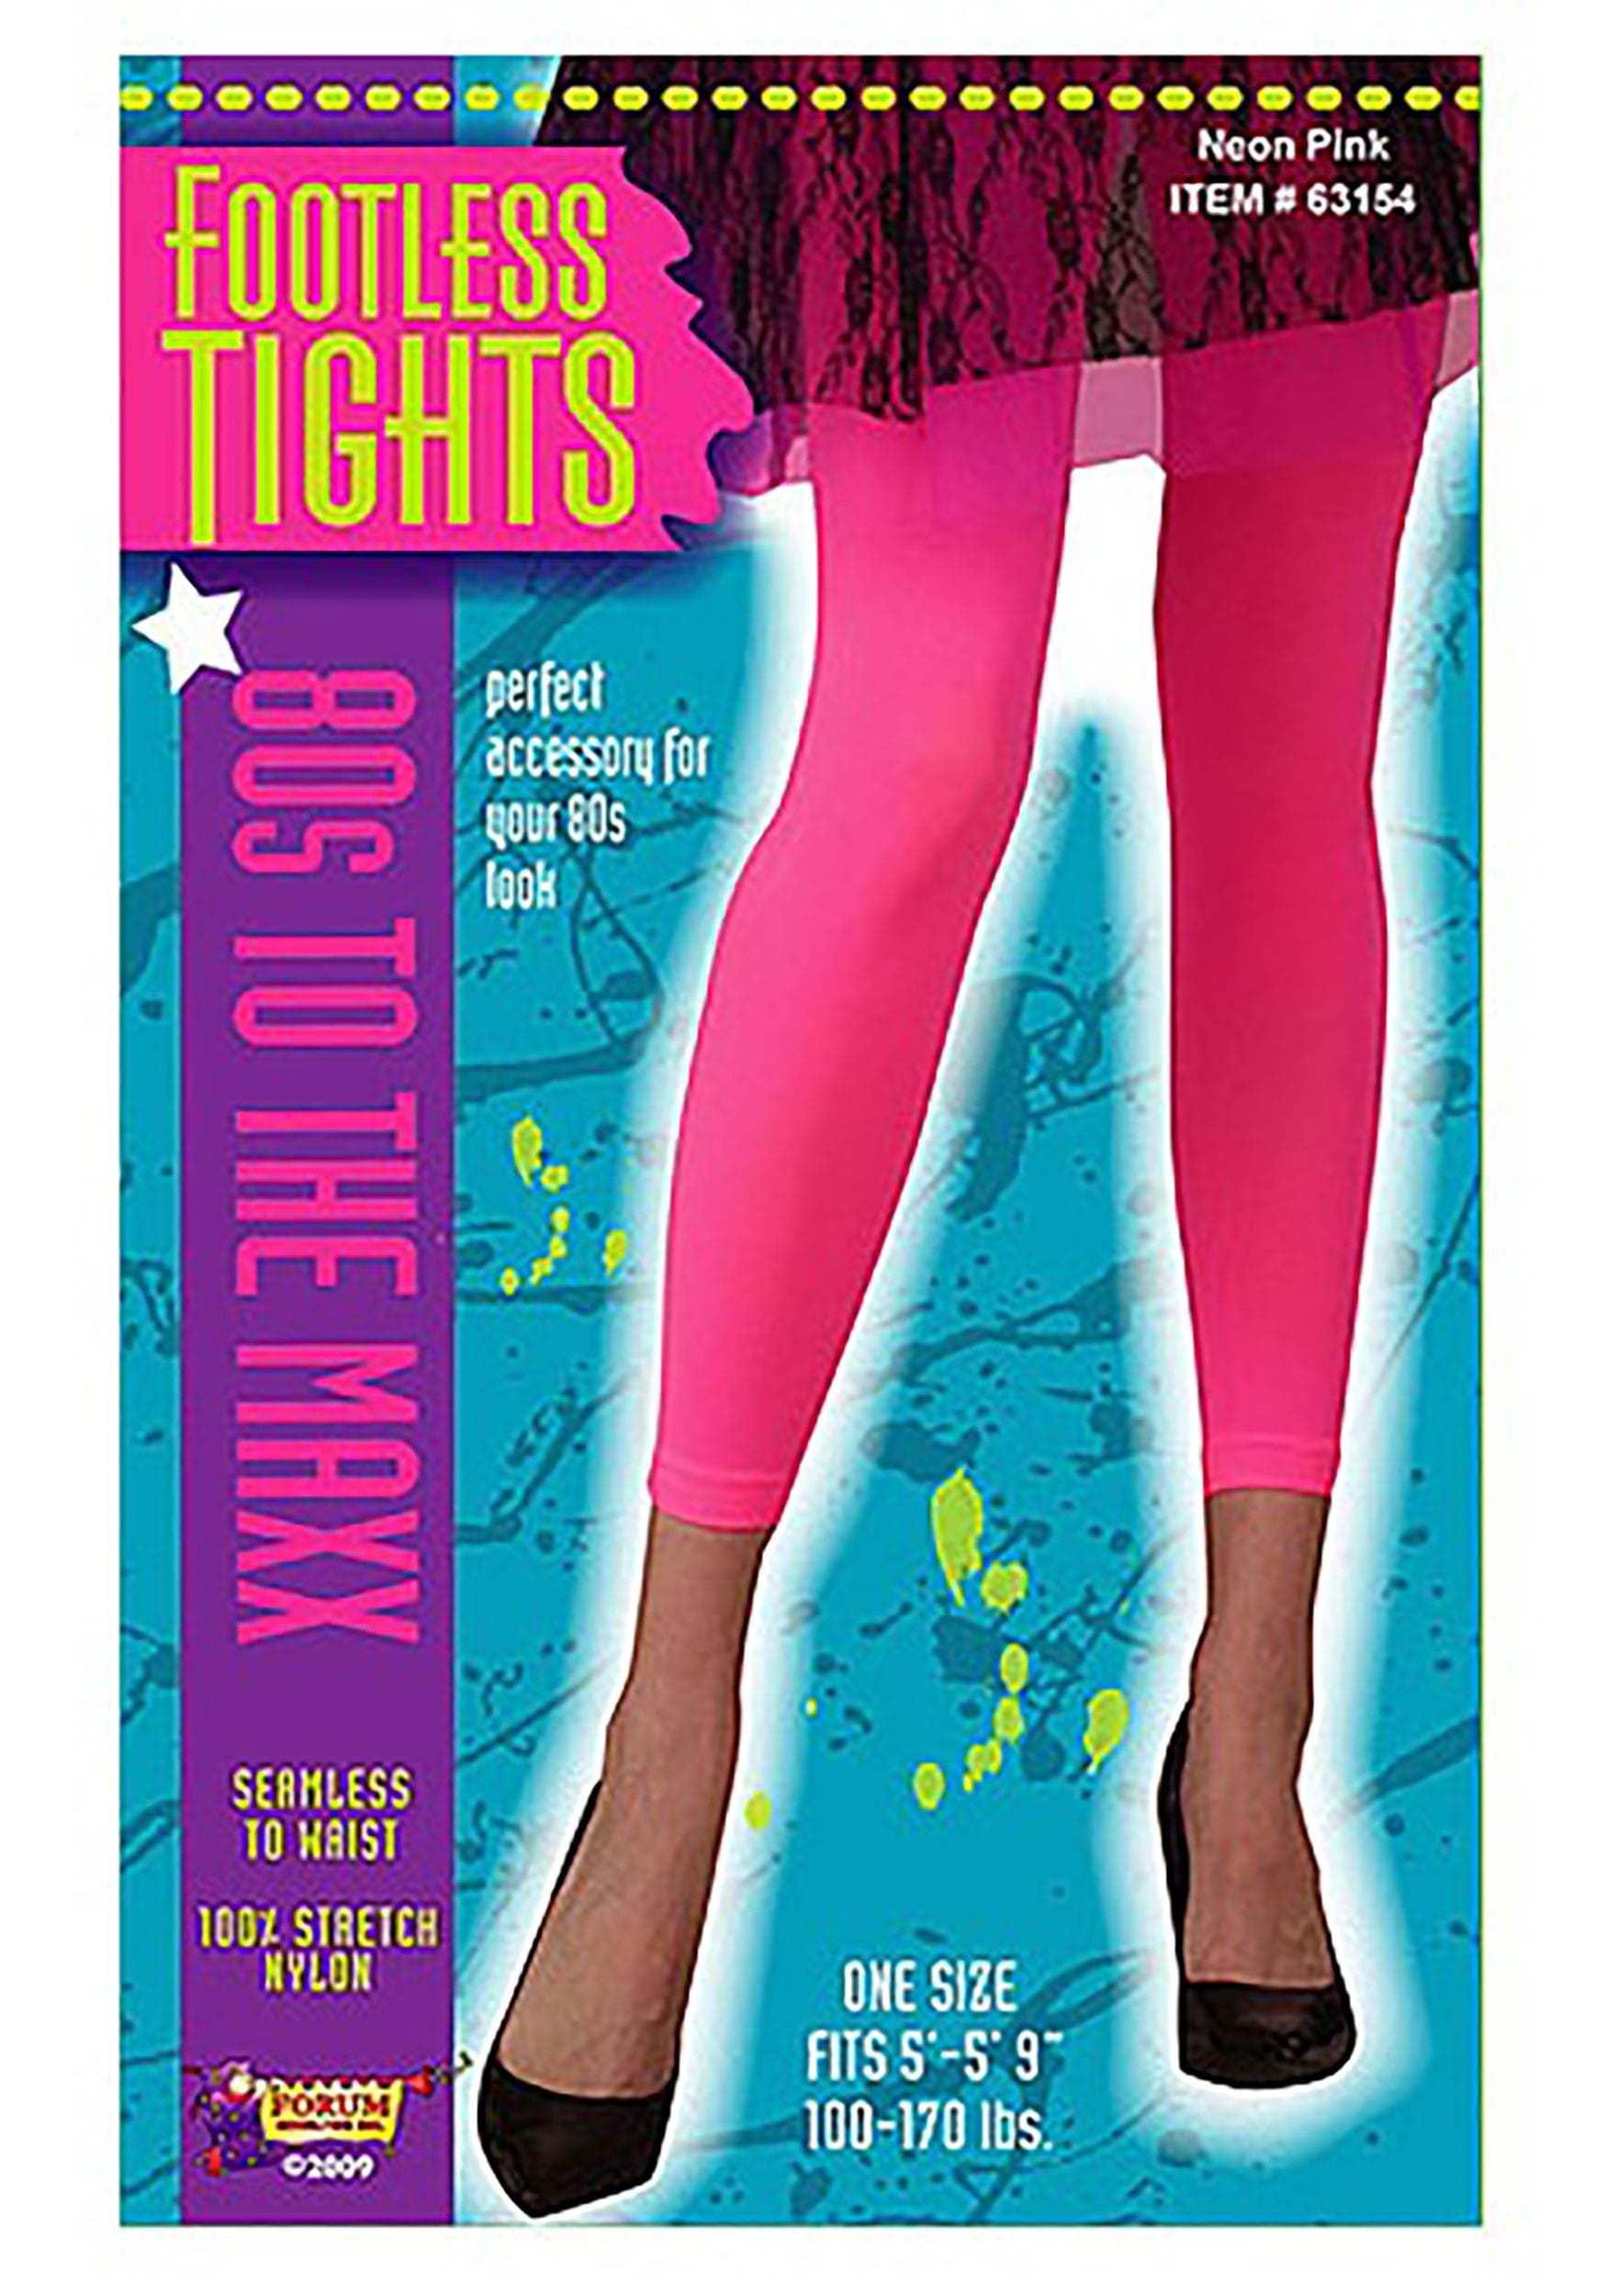  Black Footless Tights for Kids (1 Pair) - One-Size